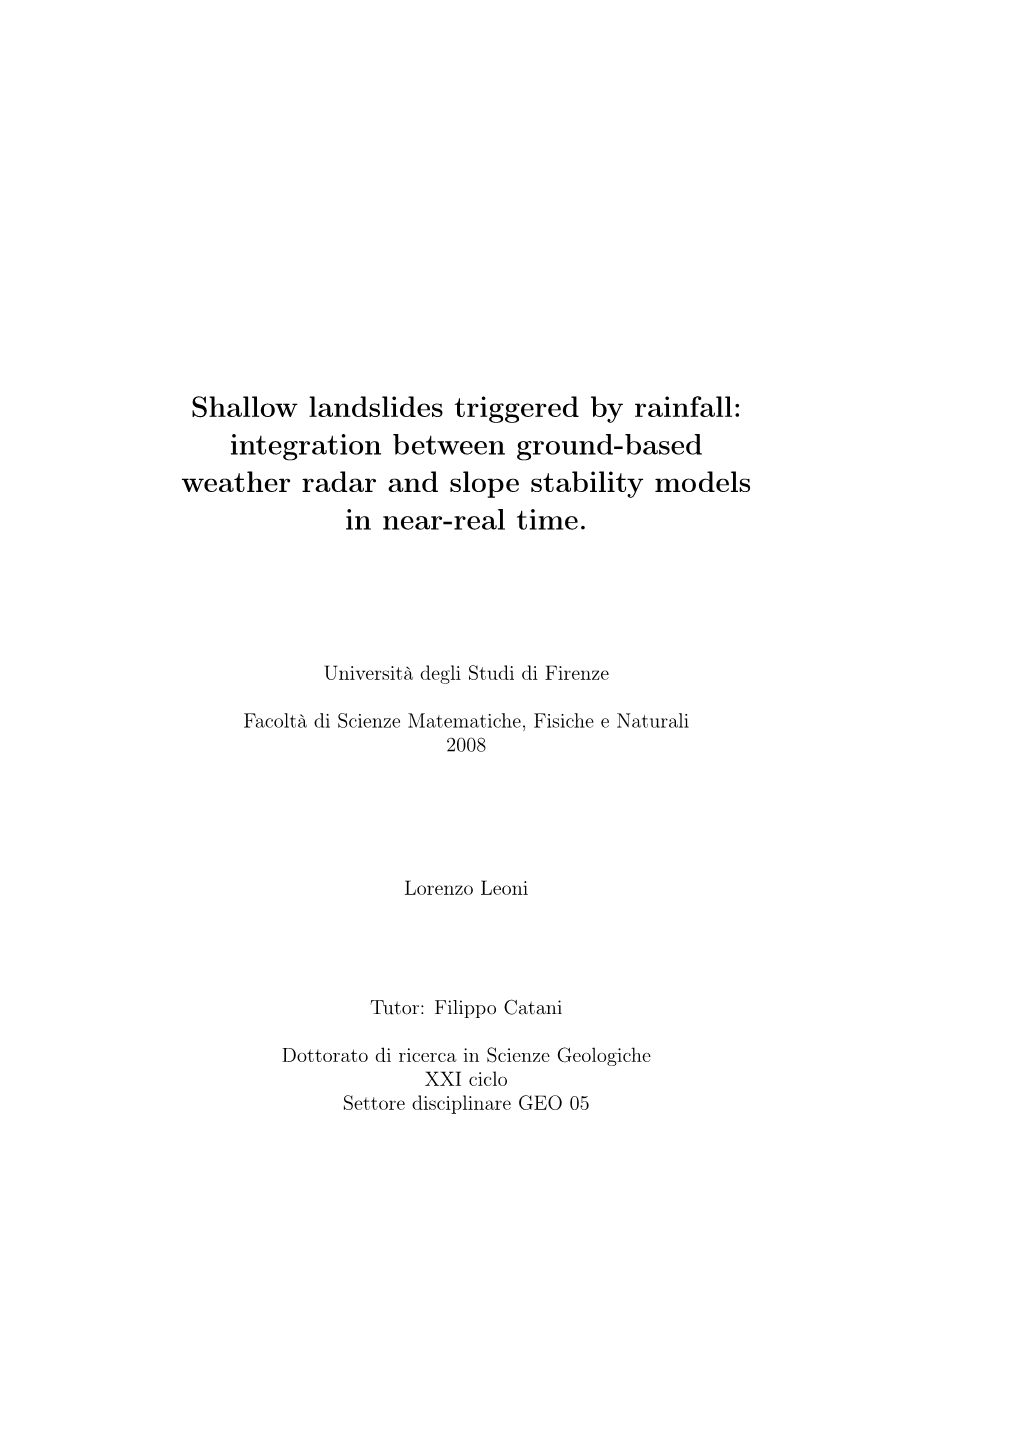 Shallow Landslides Triggered by Rainfall: Integration Between Ground-Based Weather Radar and Slope Stability Models in Near-Real Time